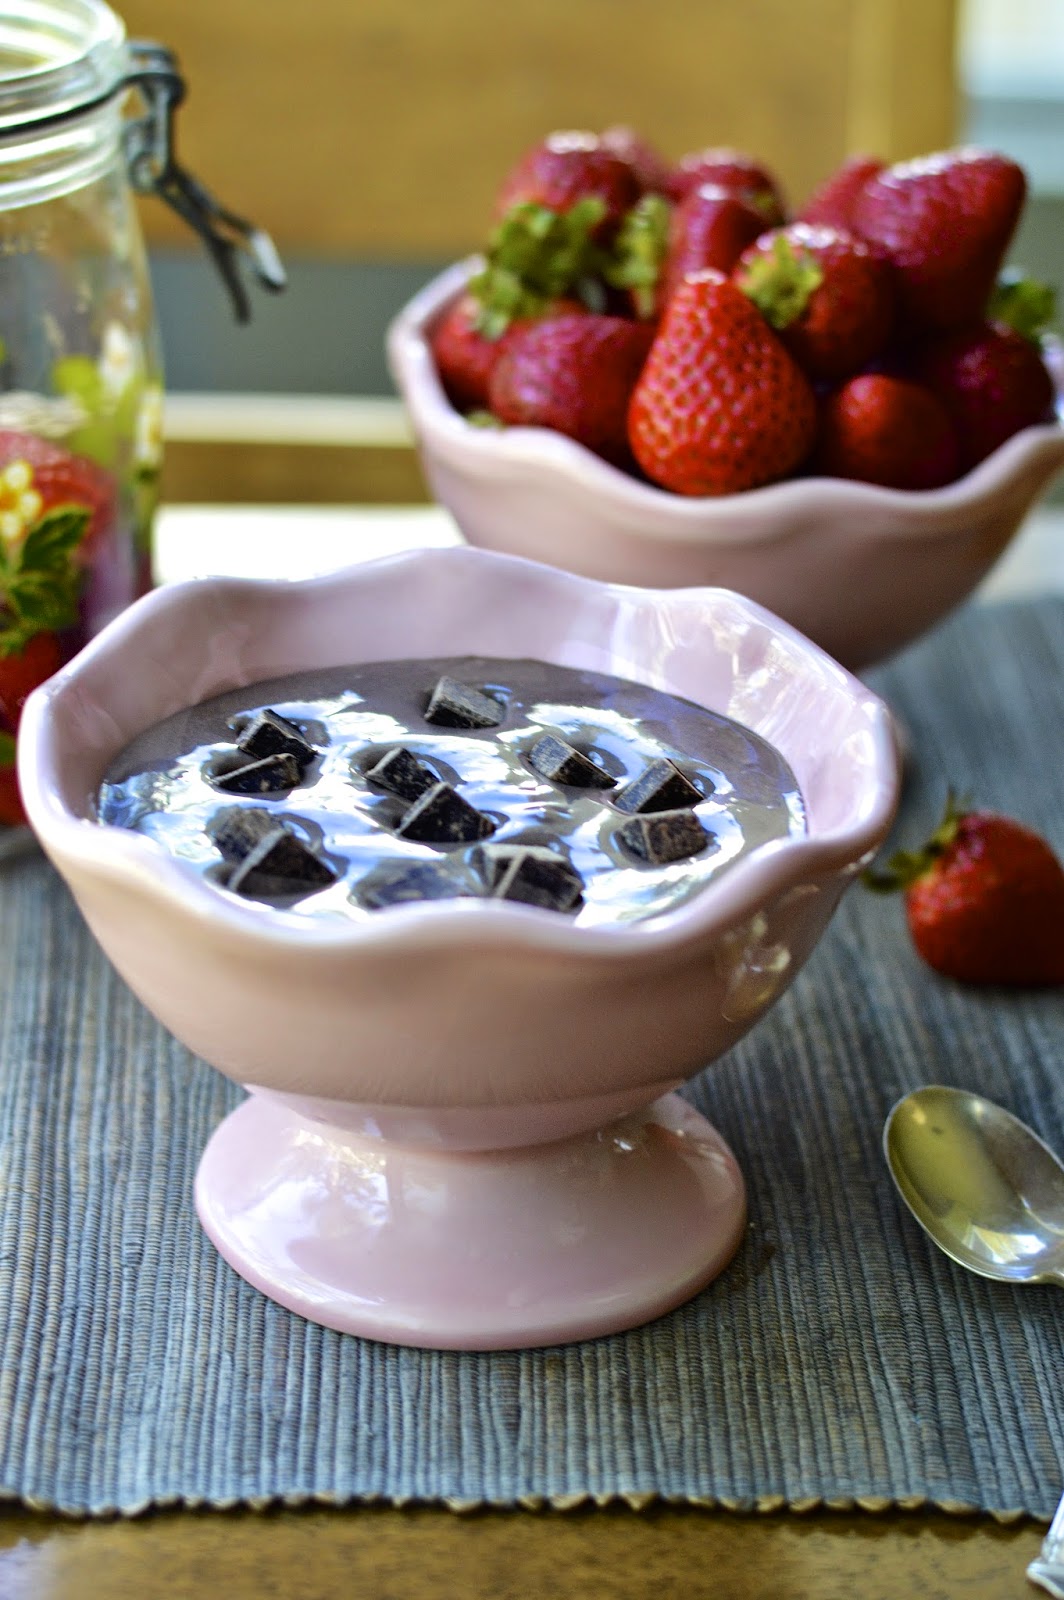 Double chocolate yogurt dip is a perfect match for seasonal fruit for a healthy and fun snack.